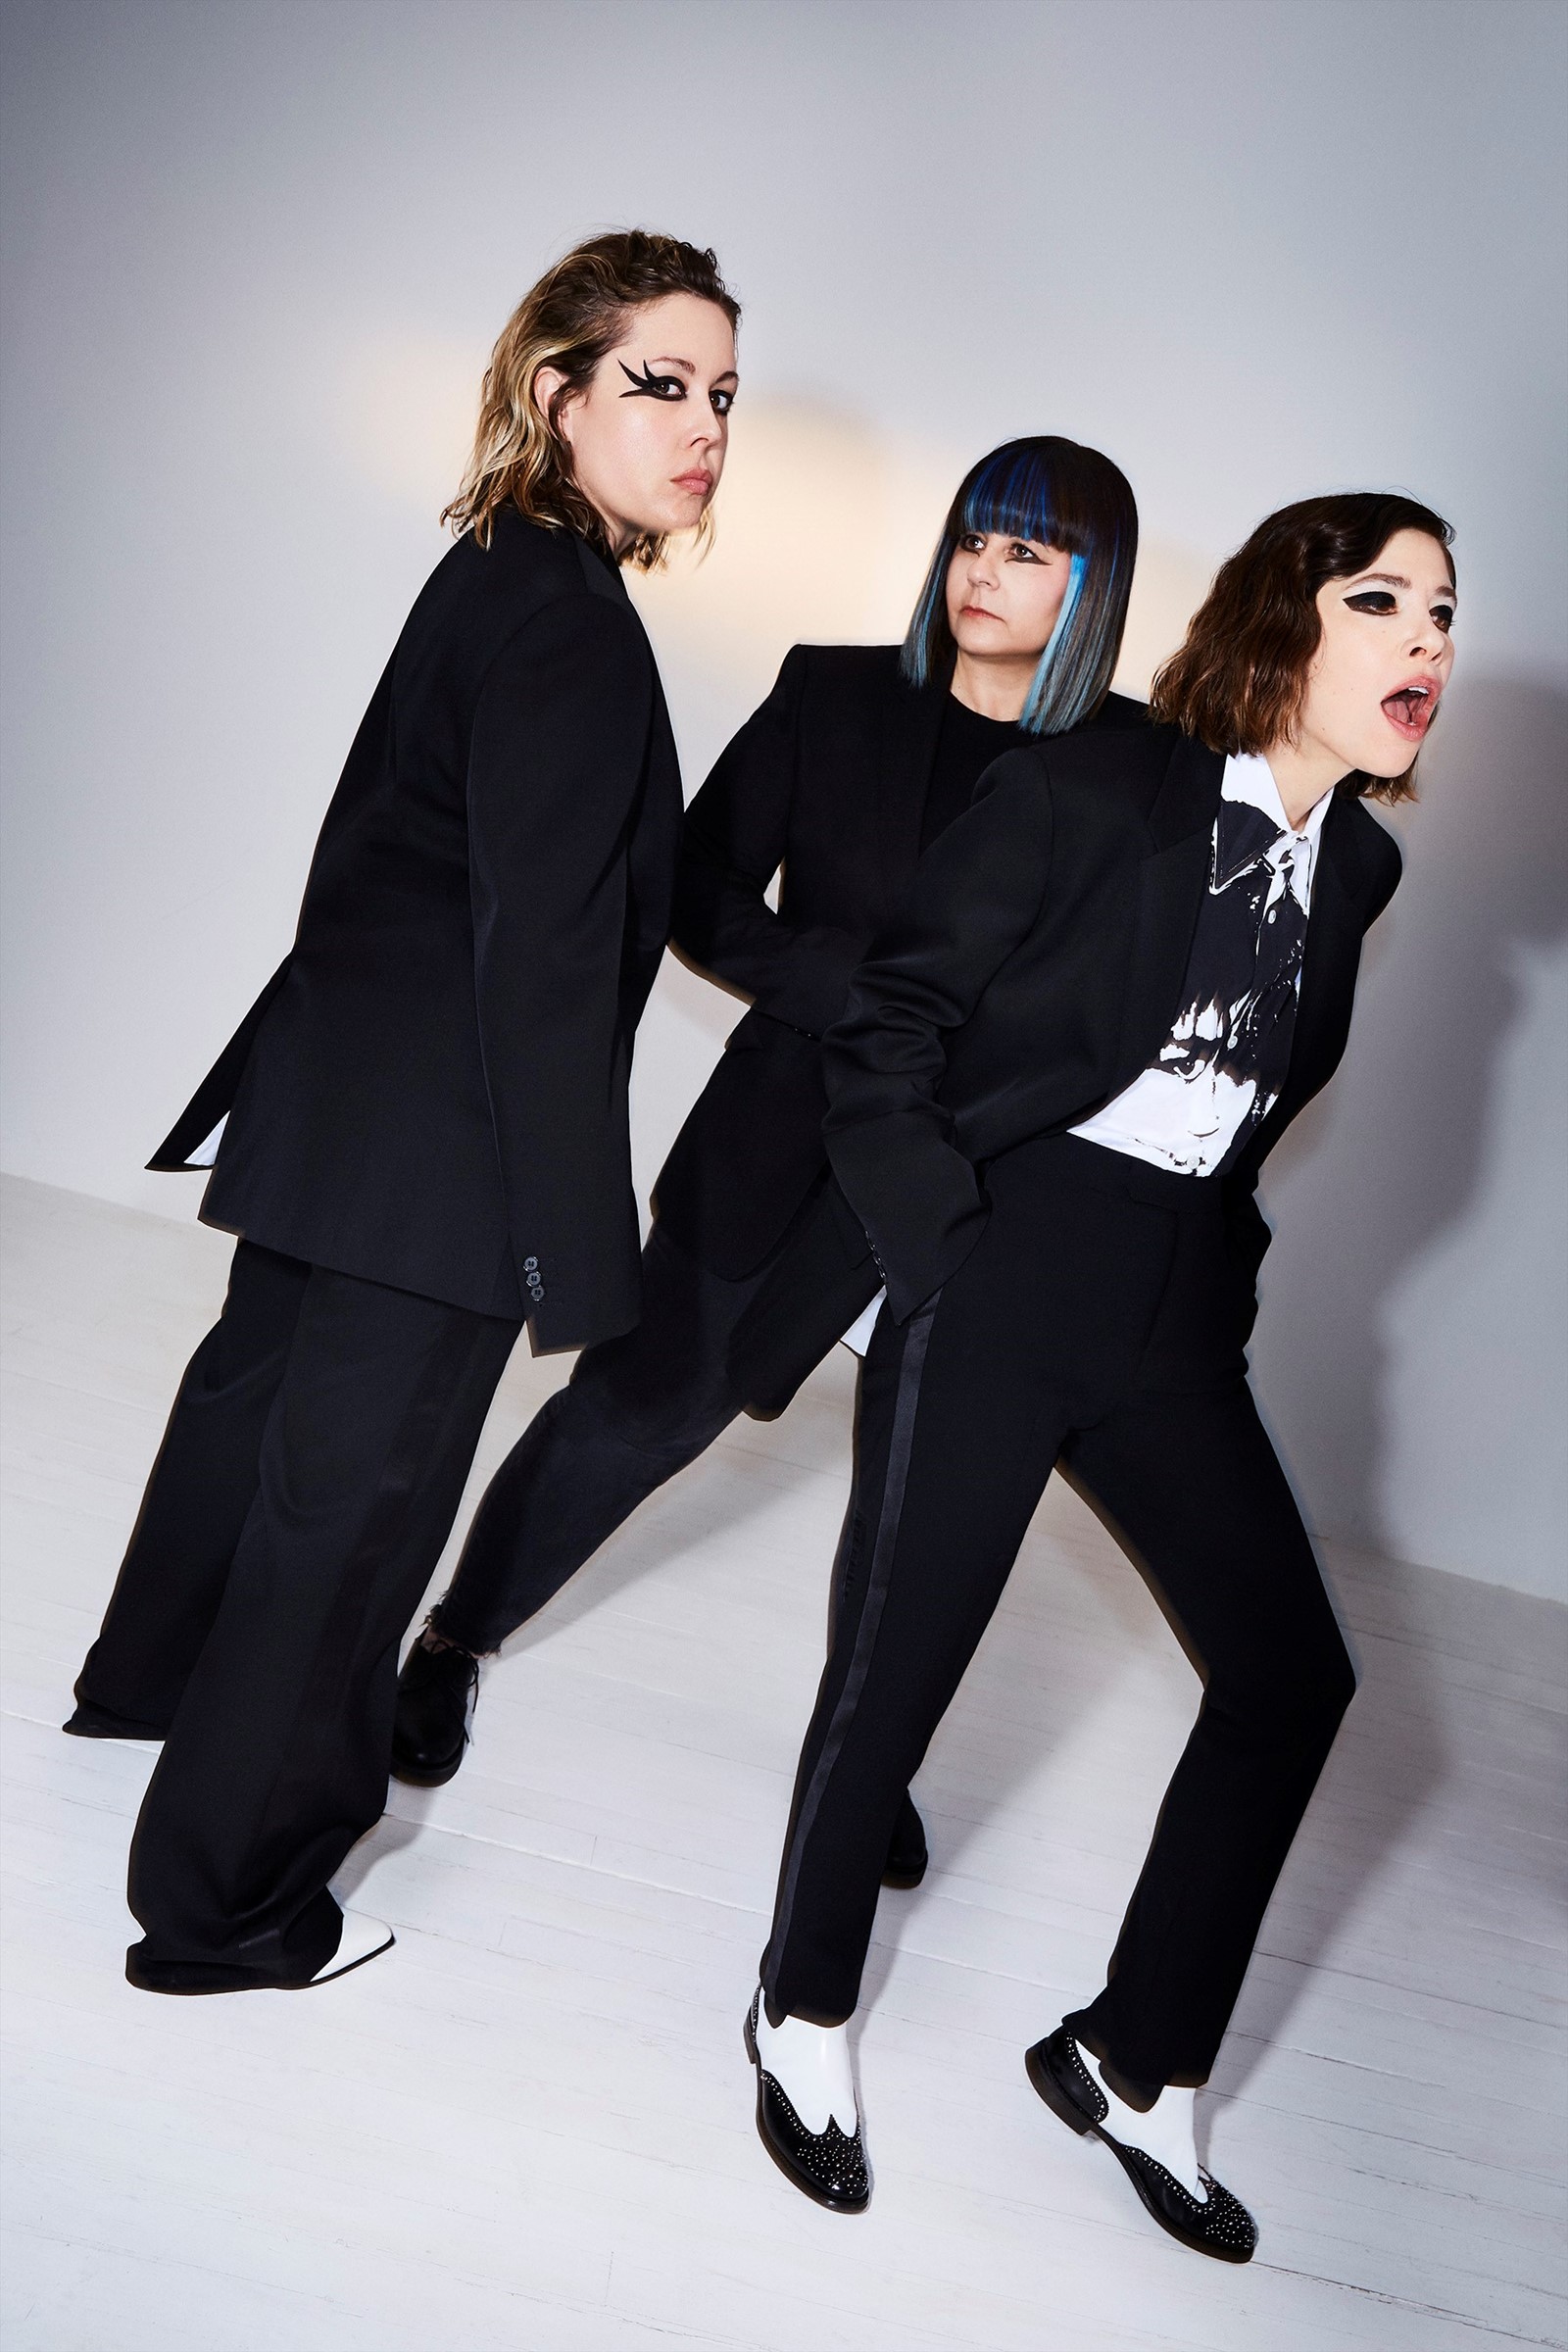 Sleater-Kinney before Janet Weiss’s departure